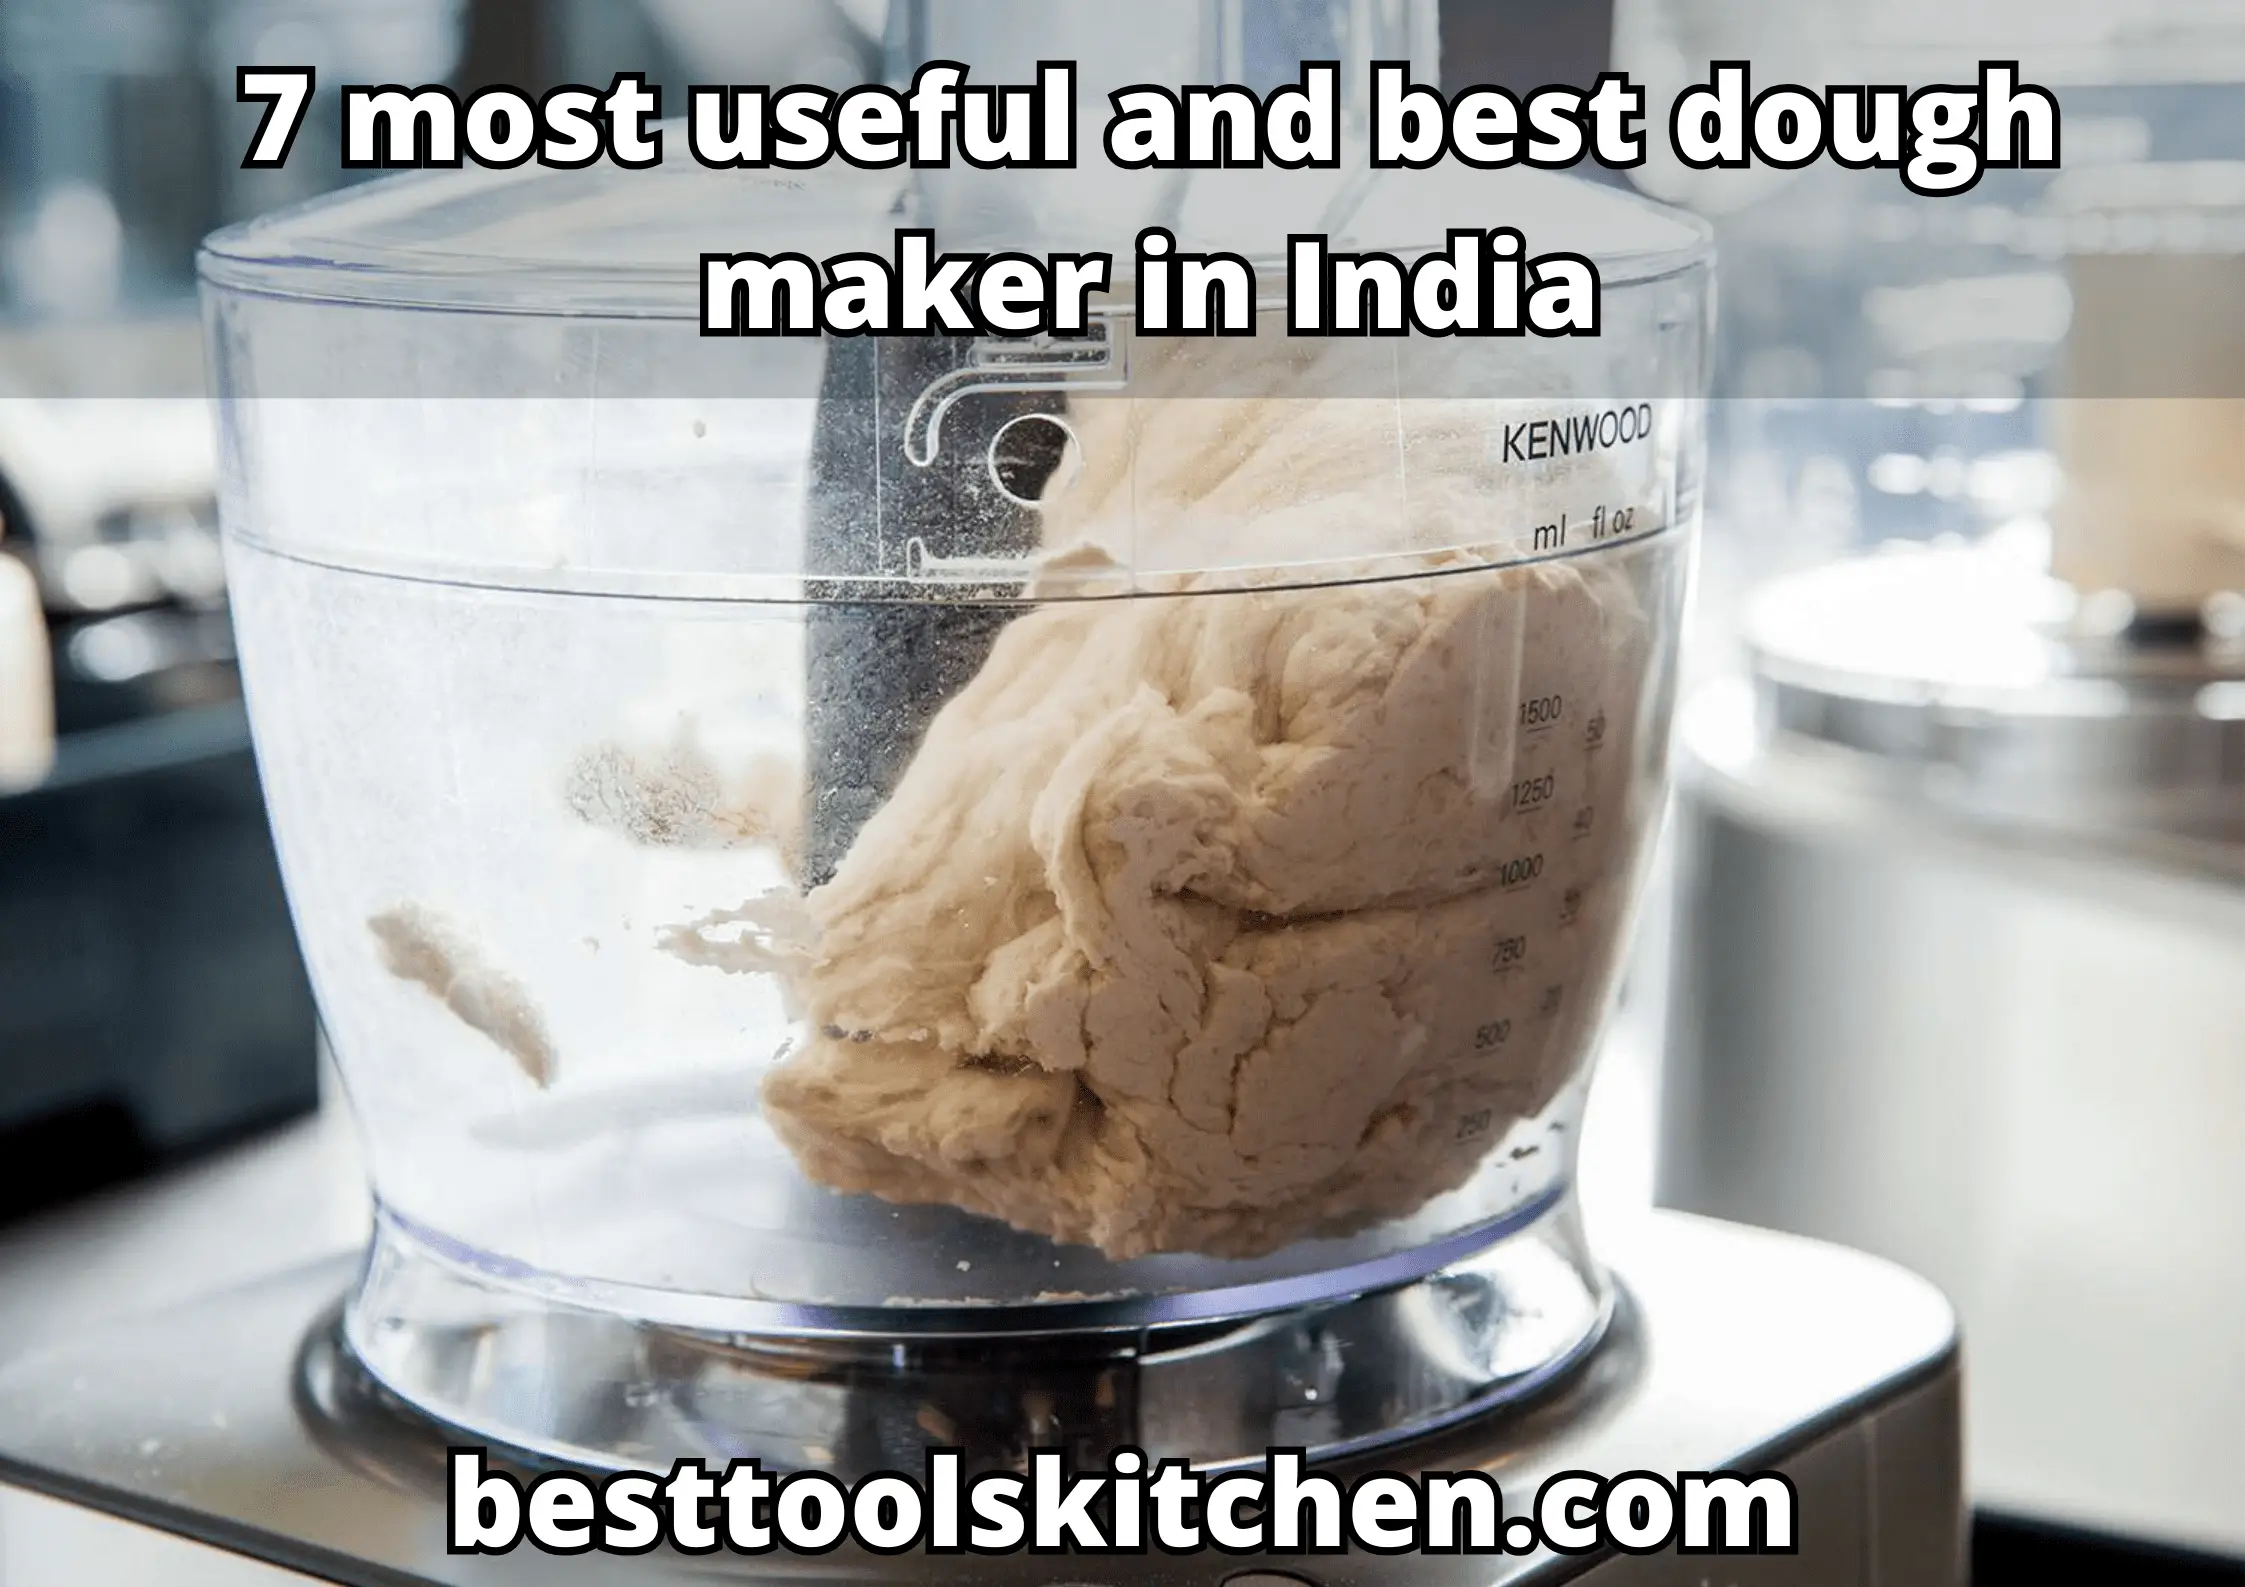 7 most useful and best dough maker in India